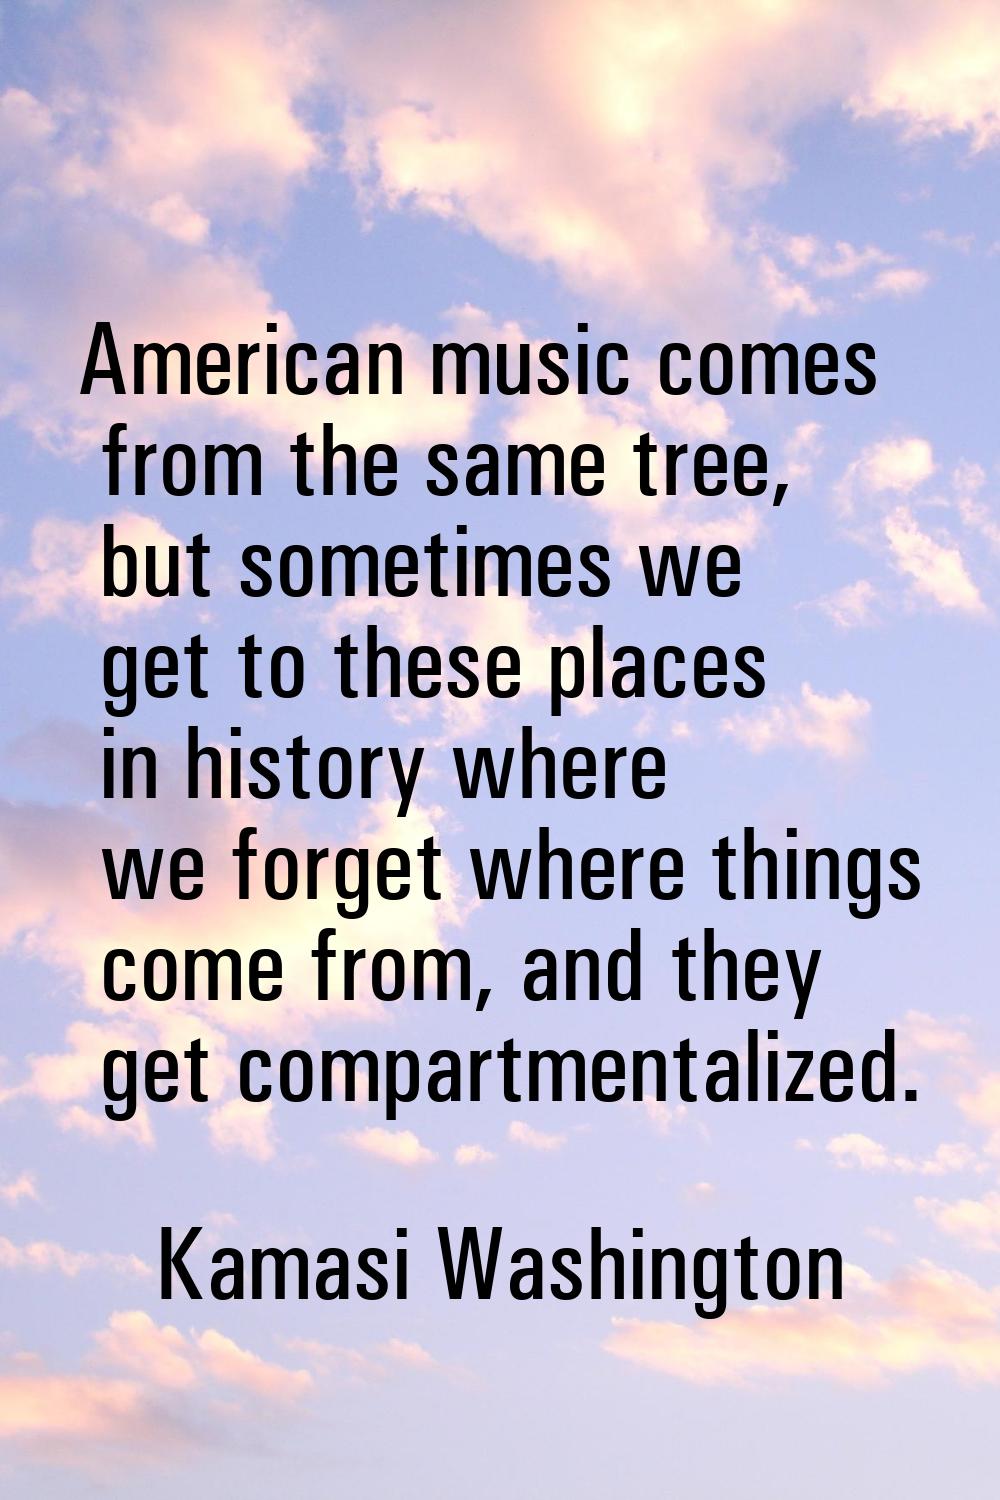 American music comes from the same tree, but sometimes we get to these places in history where we f